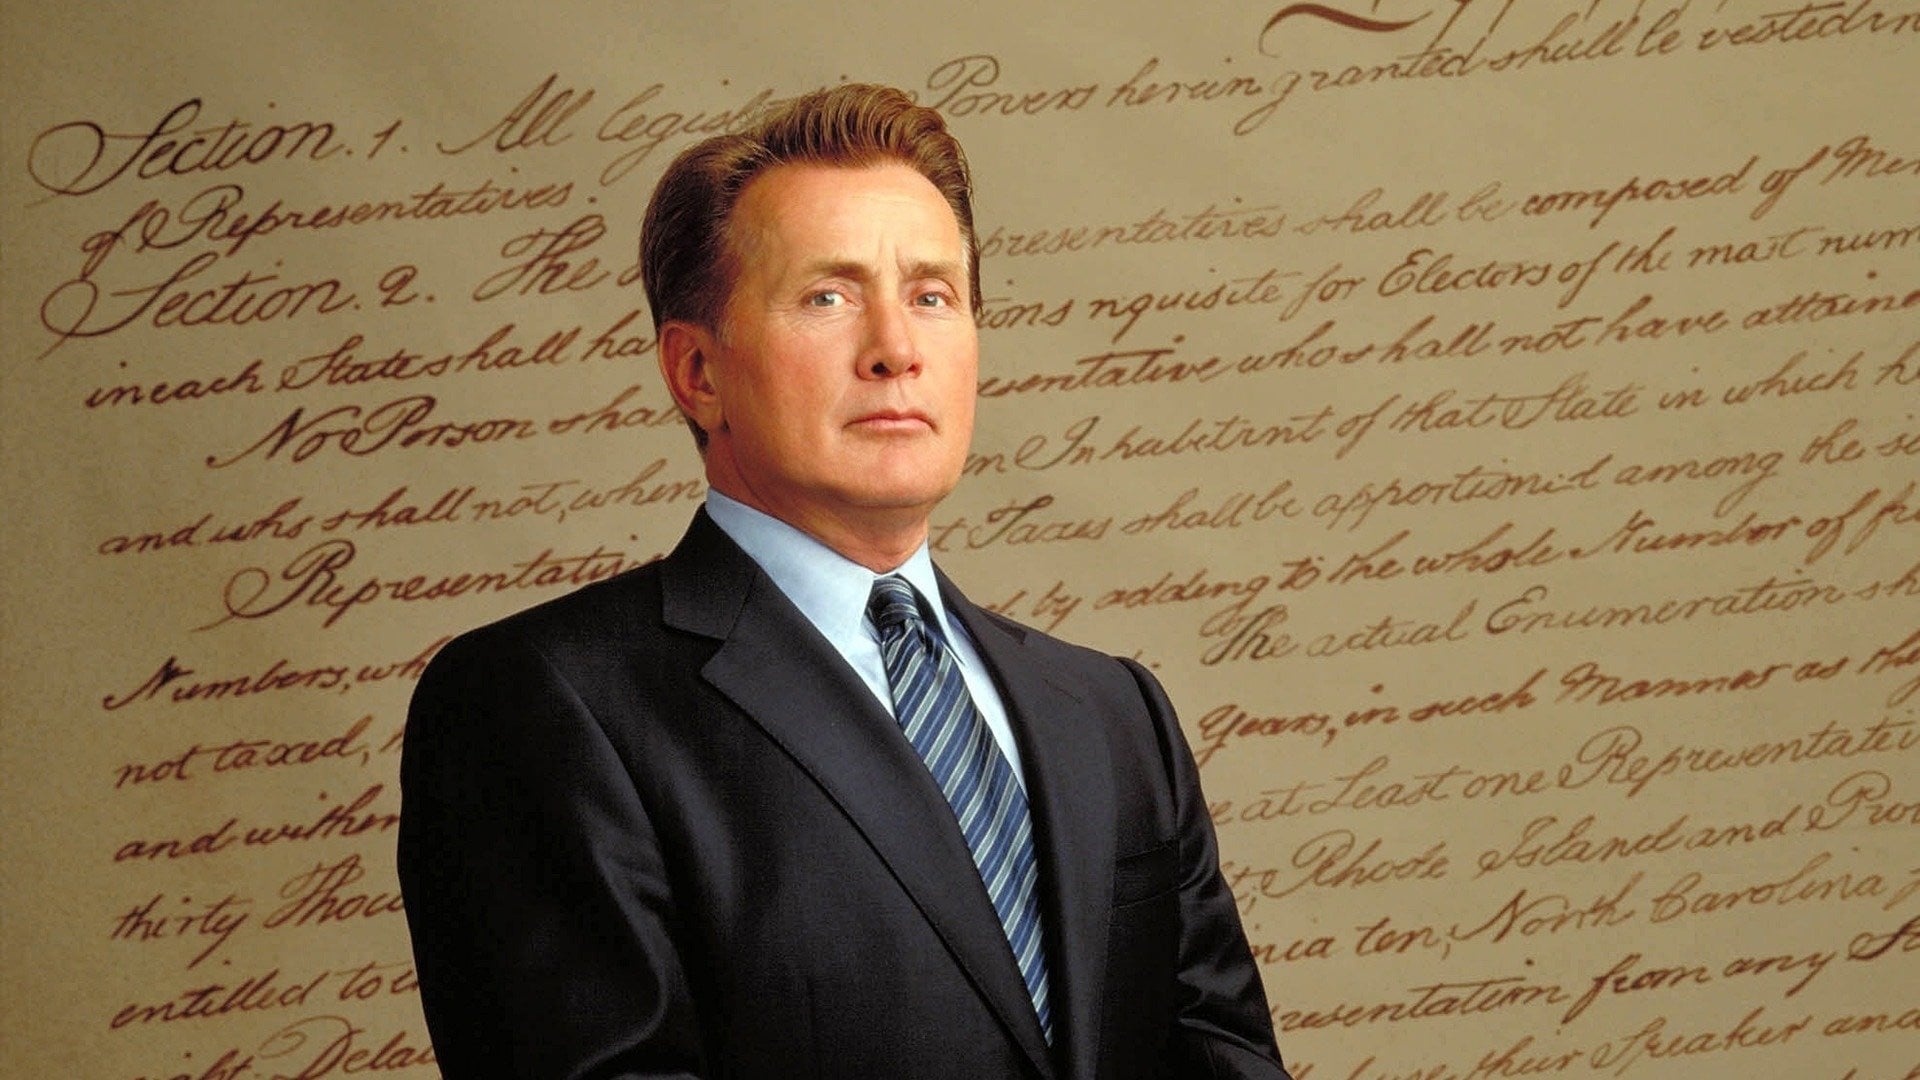 The West Wing (TV Series): Martin Sheen as the fictional Democratic President of the US, Jed Bartlet. 1920x1080 Full HD Wallpaper.